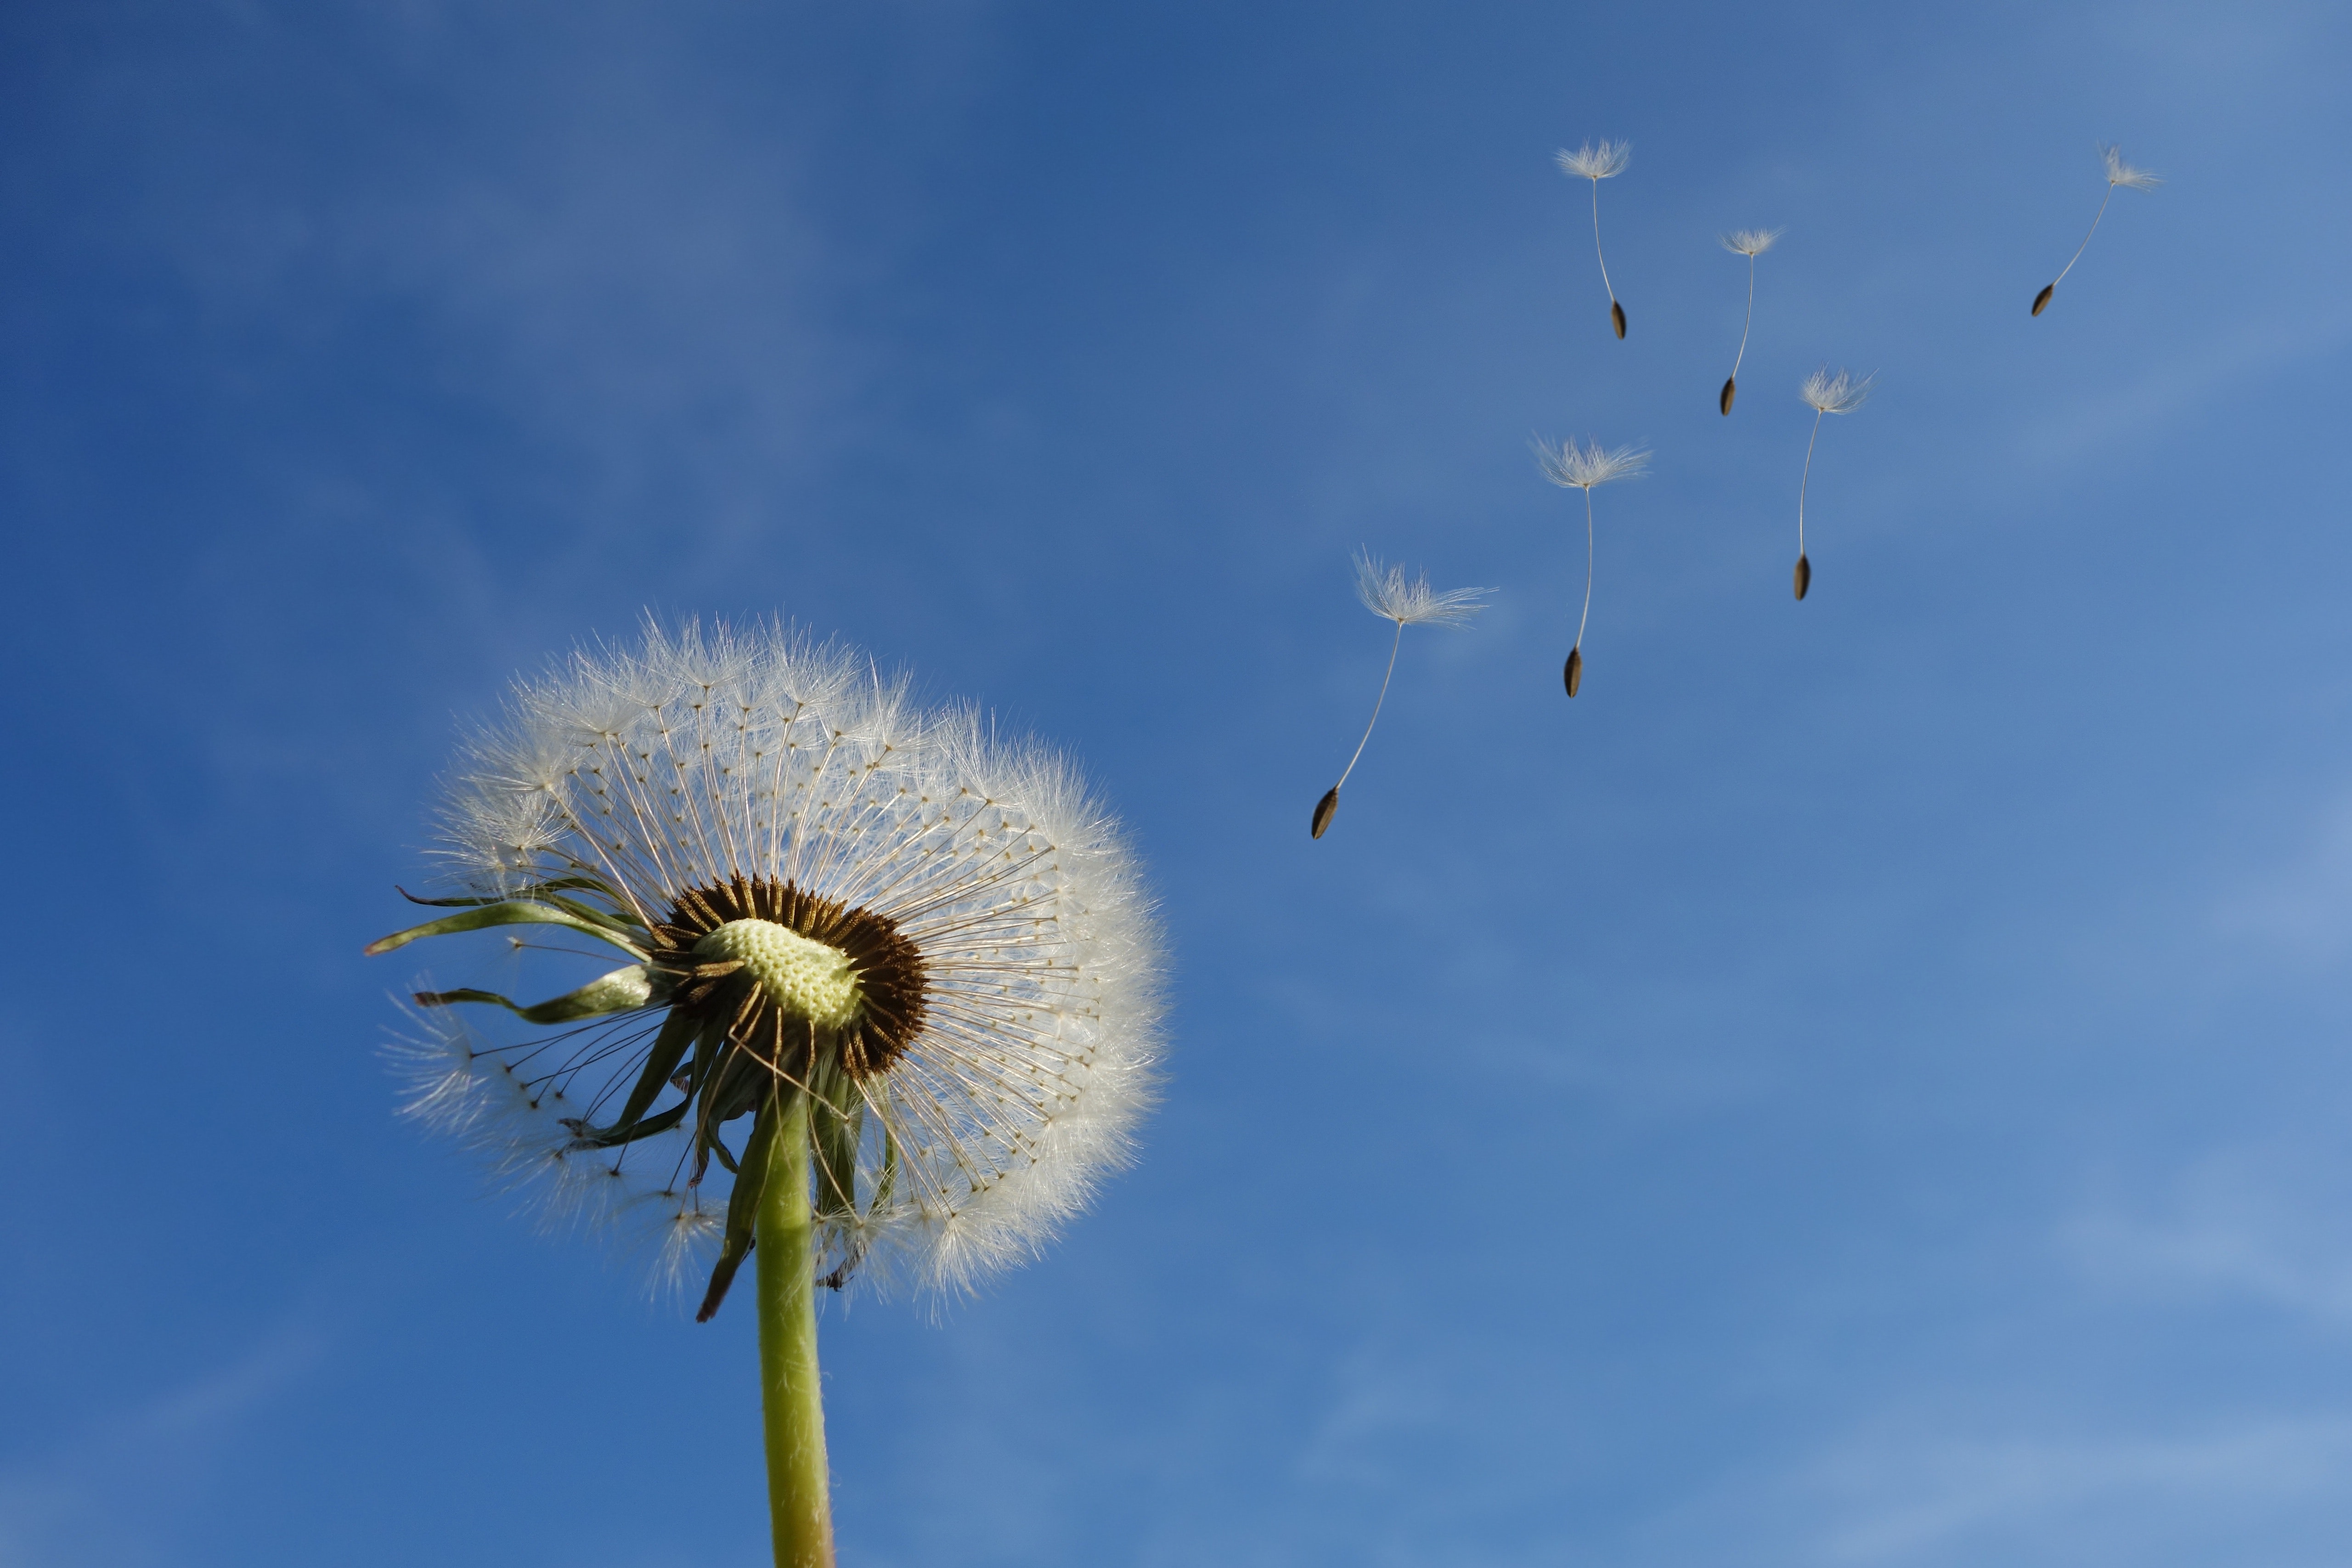 A dandelion with its seeds blowing in the wind